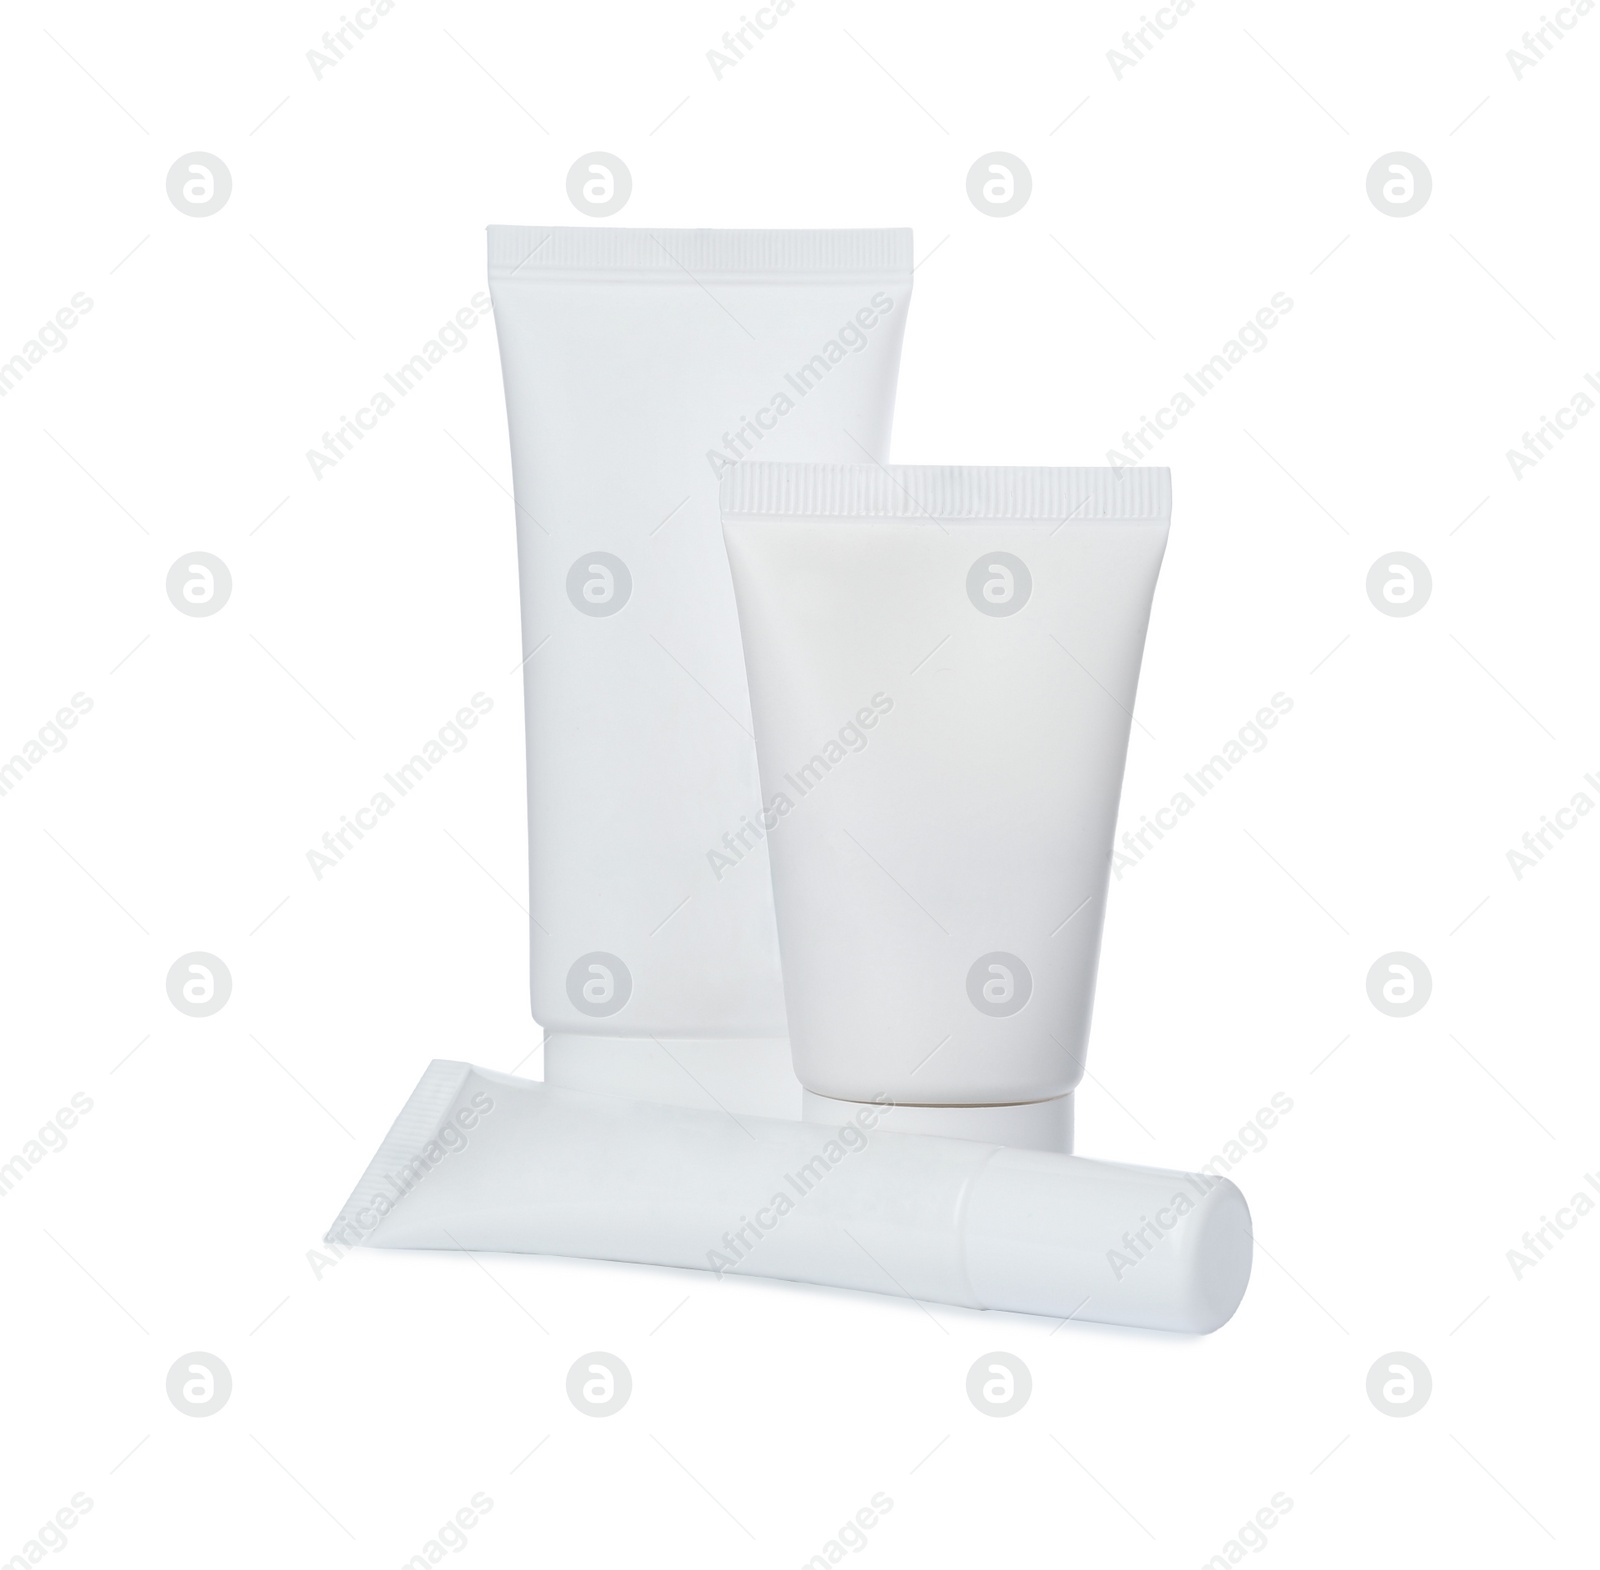 Photo of Tubes of different hand creams on white background. Mockup for design